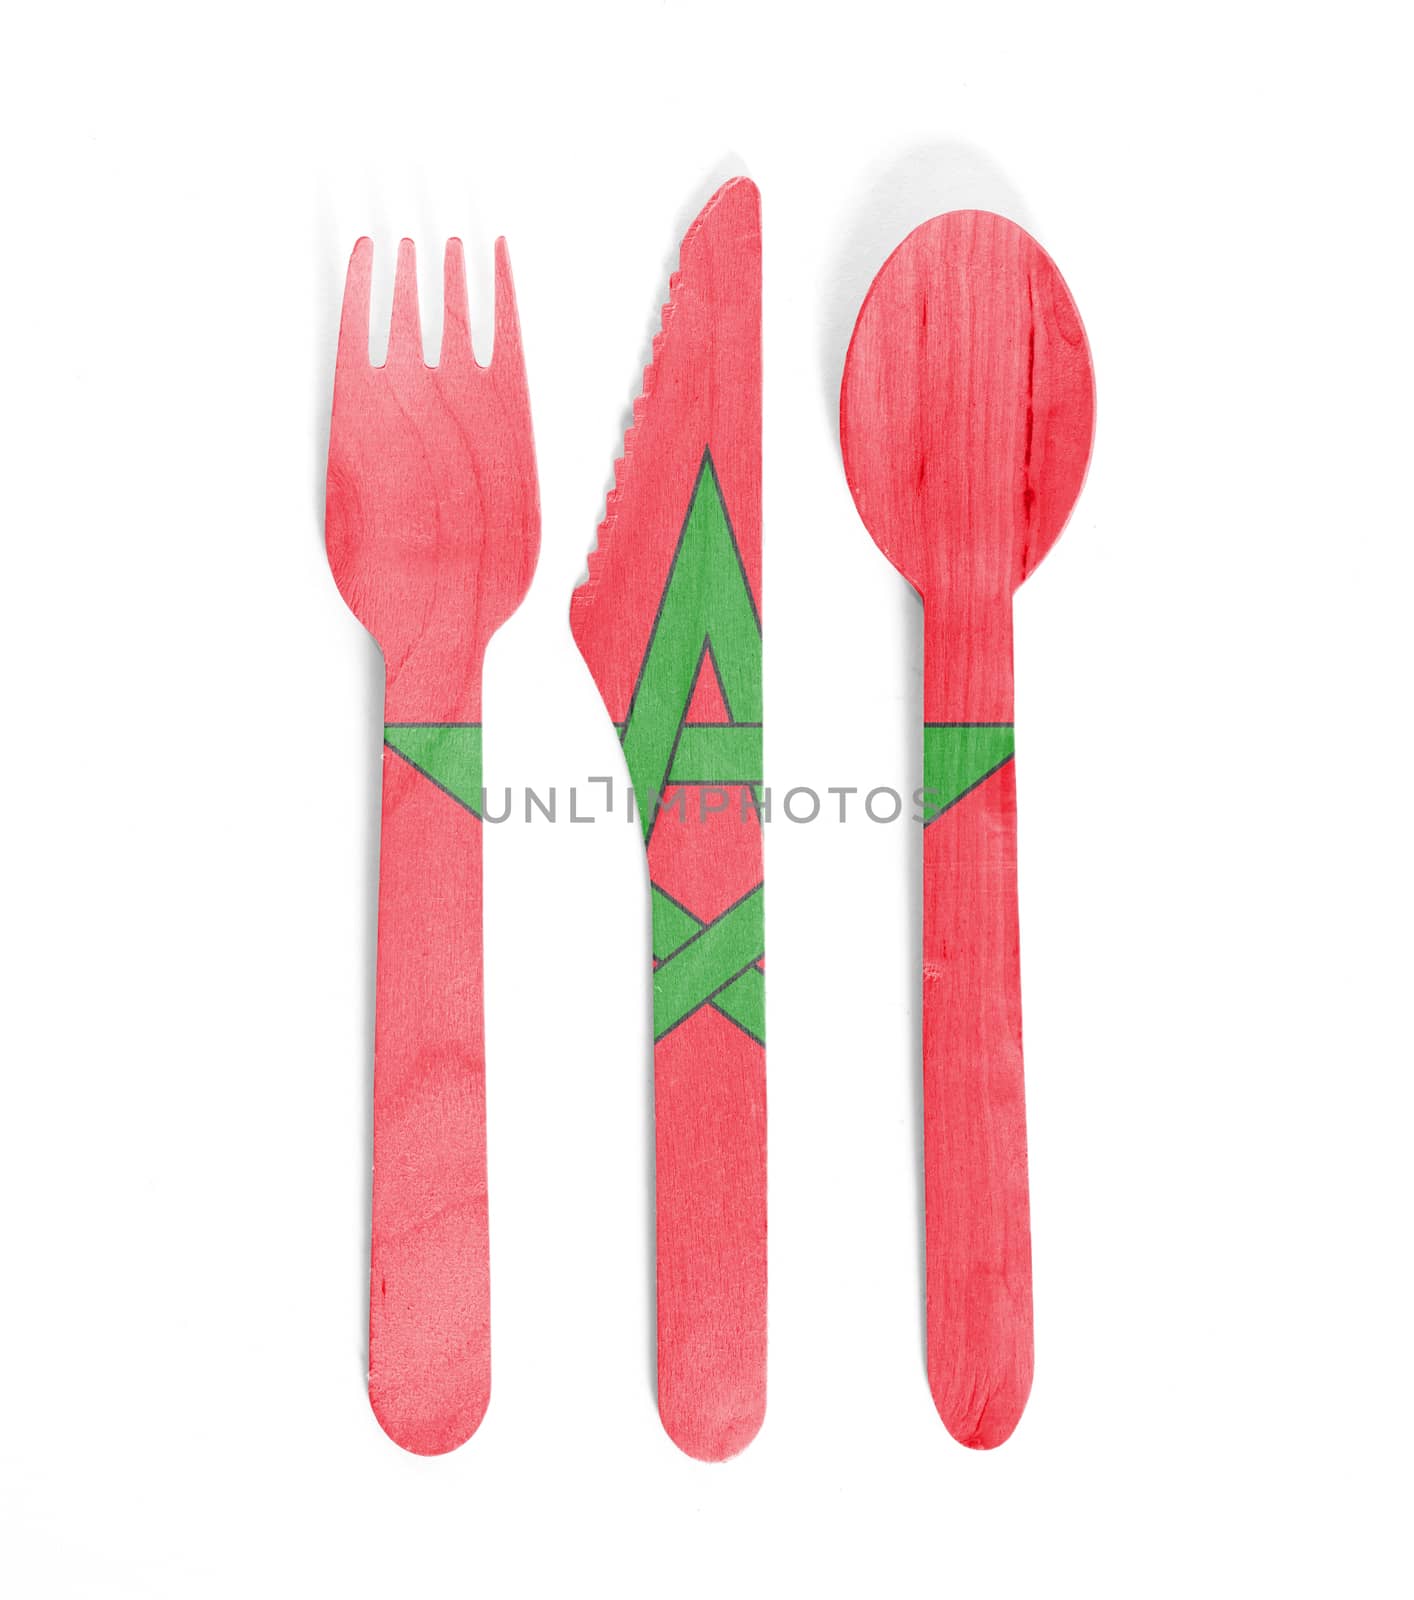 Eco friendly wooden cutlery - Plastic free concept - Isolated - Flag of Morocco